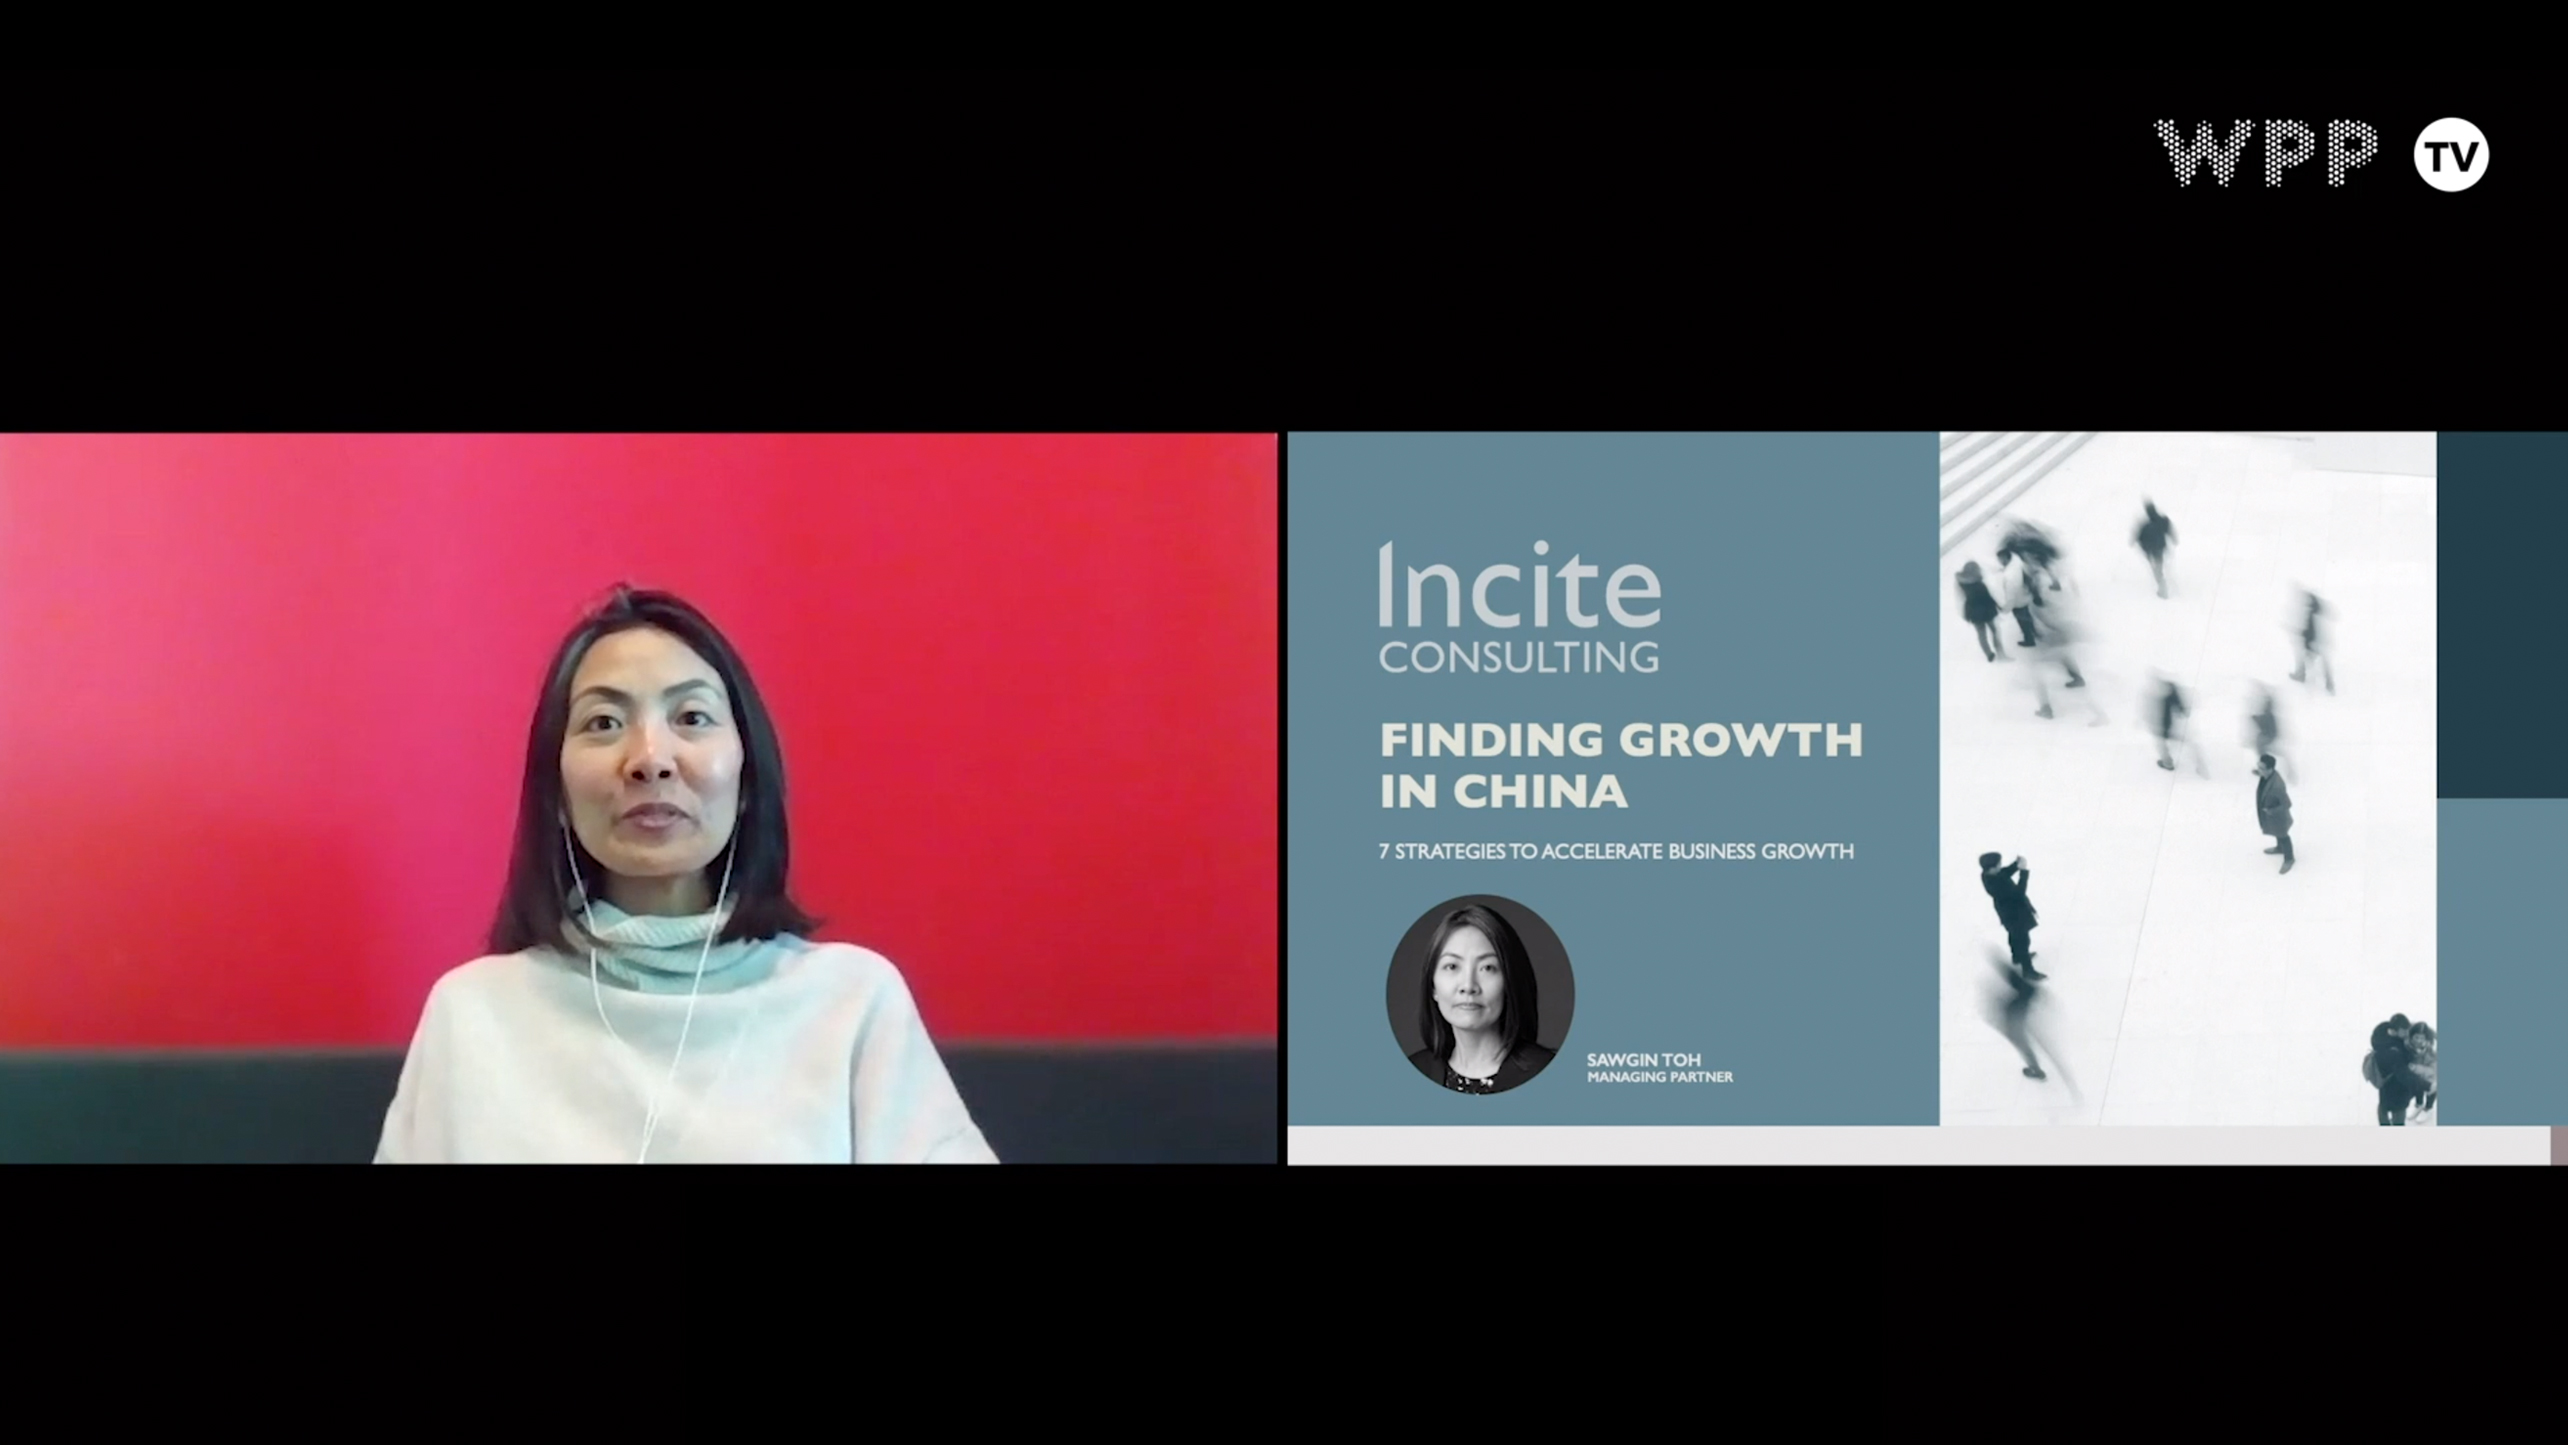 SawGin Toh, Managing Partner at Incite Consulting (the growth division of MediaCom China), explores three key learnings from a survey of C-suite leaders.